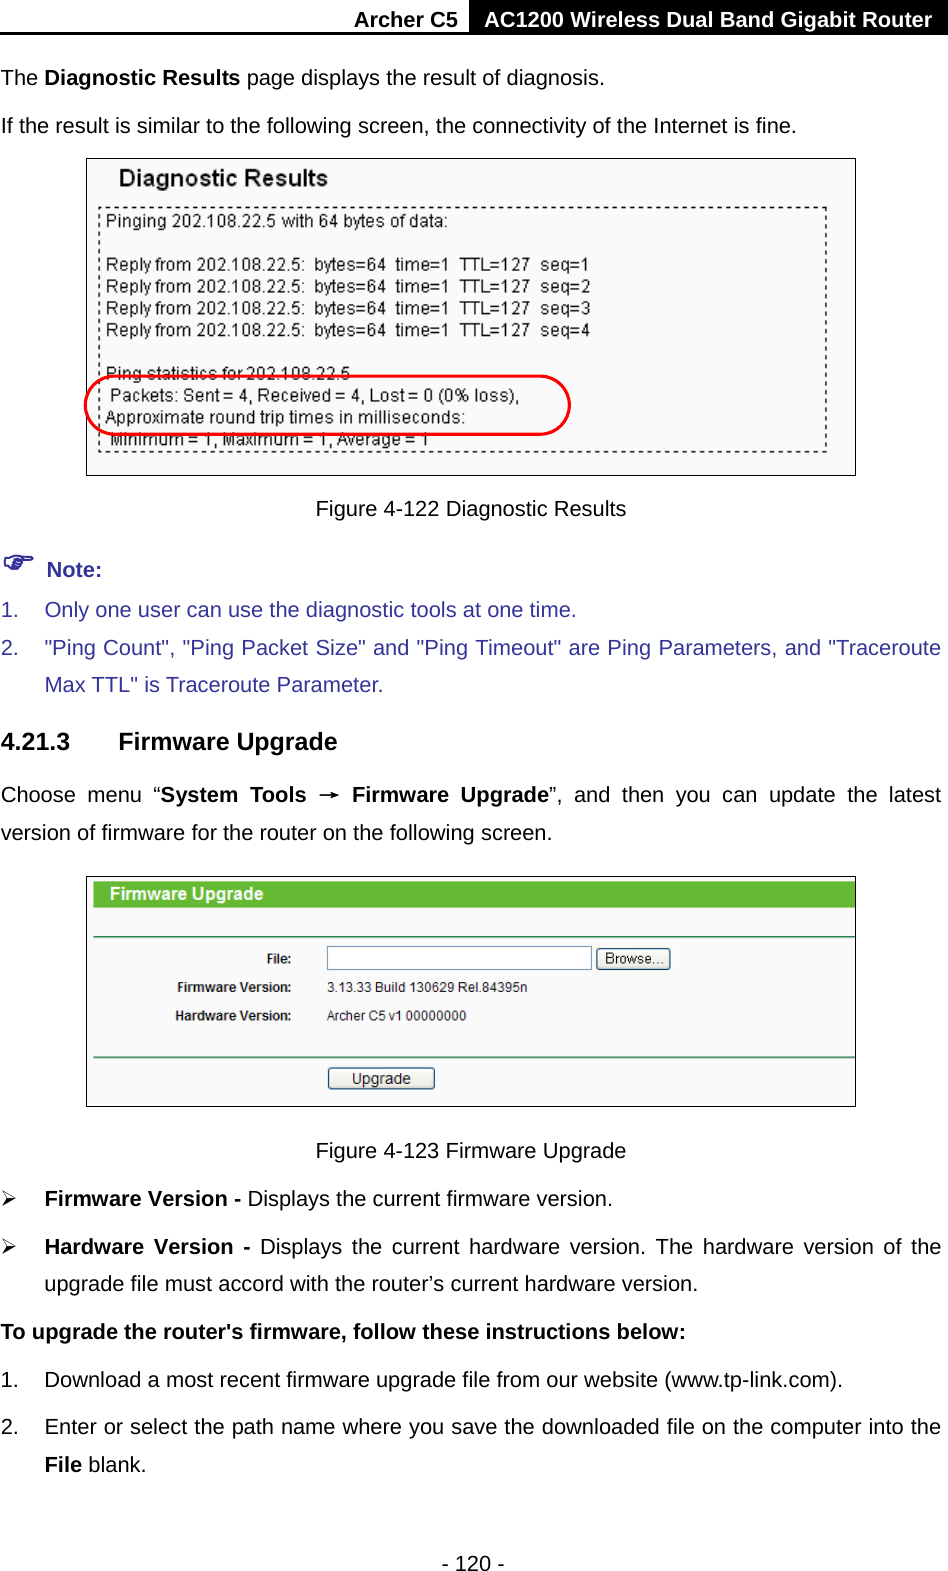 Archer C5 AC1200 Wireless Dual Band Gigabit Router  - 120 - The Diagnostic Results page displays the result of diagnosis. If the result is similar to the following screen, the connectivity of the Internet is fine.  Figure 4-122 Diagnostic Results  Note: 1. Only one user can use the diagnostic tools at one time.   2. &quot;Ping Count&quot;, &quot;Ping Packet Size&quot; and &quot;Ping Timeout&quot; are Ping Parameters, and &quot;Traceroute Max TTL&quot; is Traceroute Parameter.   4.21.3 Firmware Upgrade Choose menu “System Tools → Firmware Upgrade”,  and then you can update  the latest version of firmware for the router on the following screen.  Figure 4-123 Firmware Upgrade  Firmware Version - Displays the current firmware version.  Hardware Version -  Displays the current hardware version. The hardware version of the upgrade file must accord with the router’s current hardware version. To upgrade the router&apos;s firmware, follow these instructions below: 1. Download a most recent firmware upgrade file from our website (www.tp-link.com).   2. Enter or select the path name where you save the downloaded file on the computer into the File blank.   